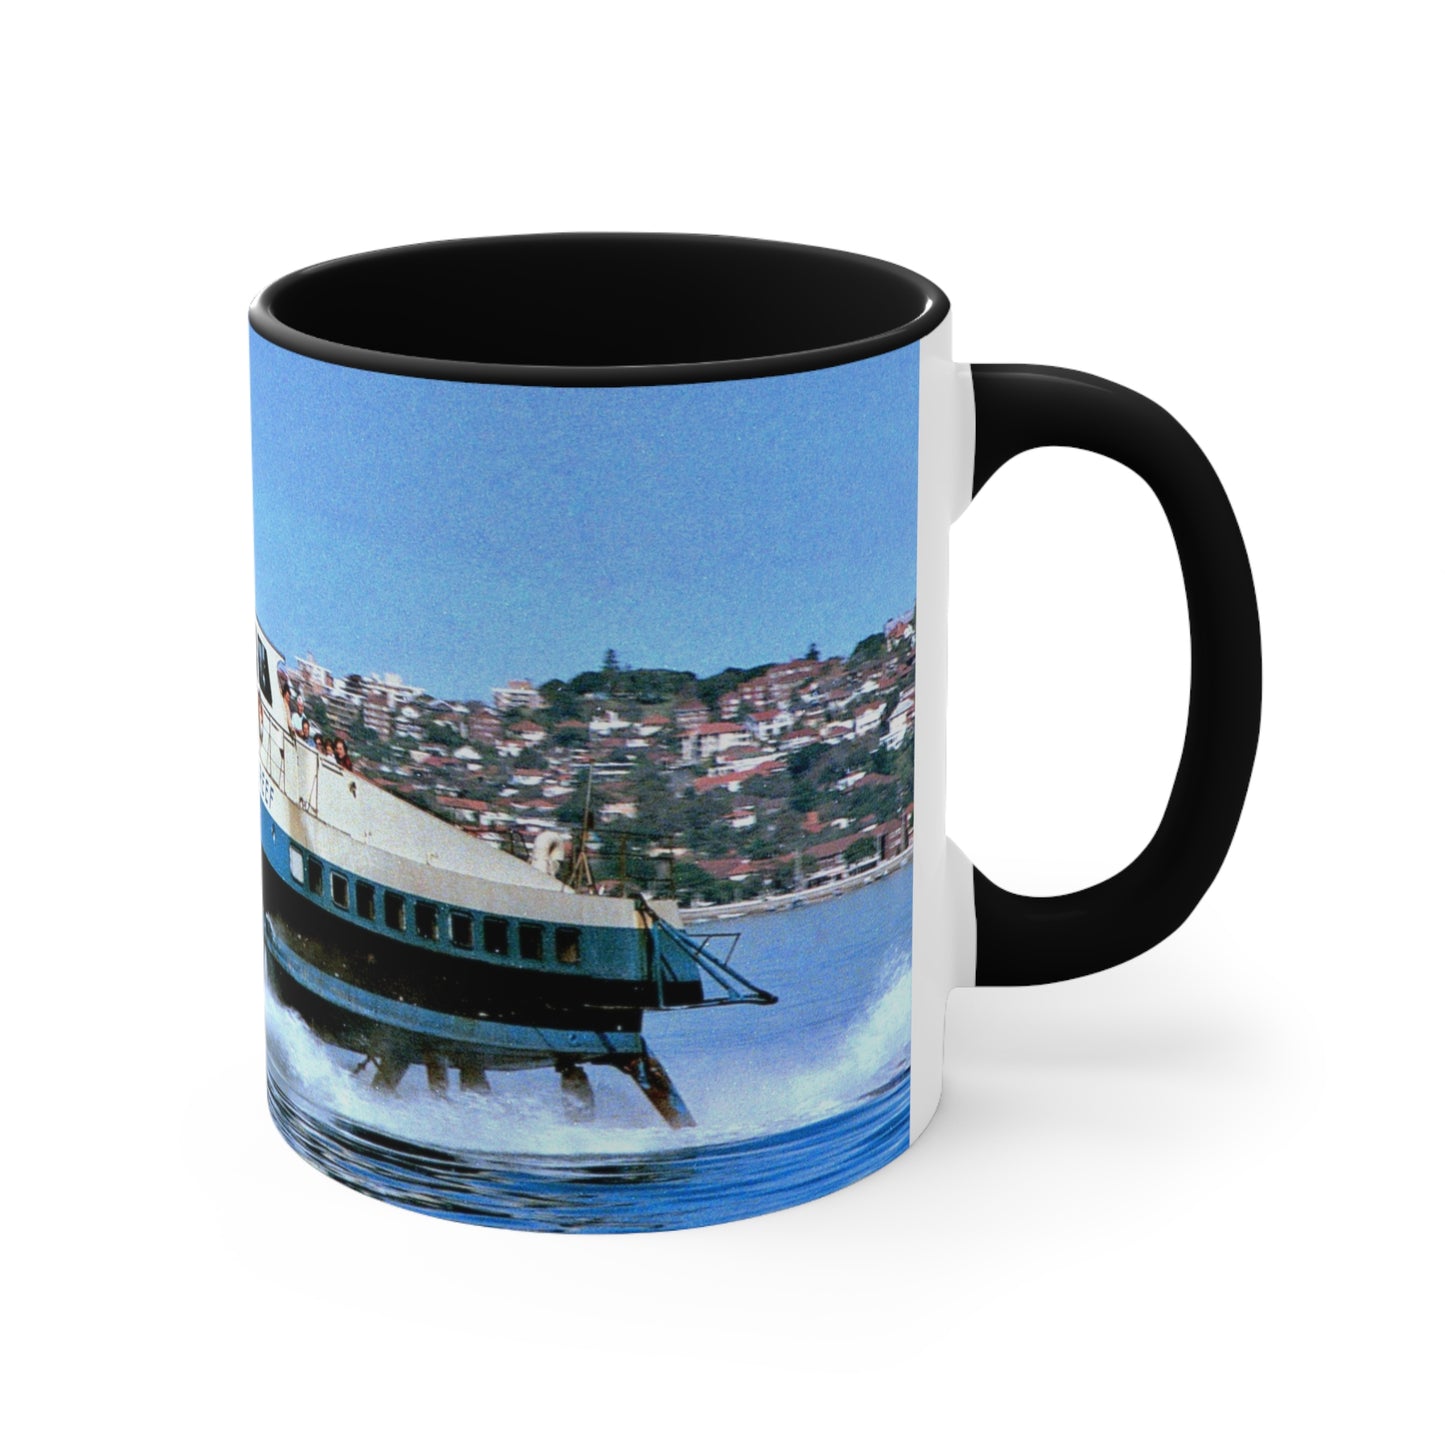 Coffee Tea Cup with Manly Hydrofoil 'Long Reef'